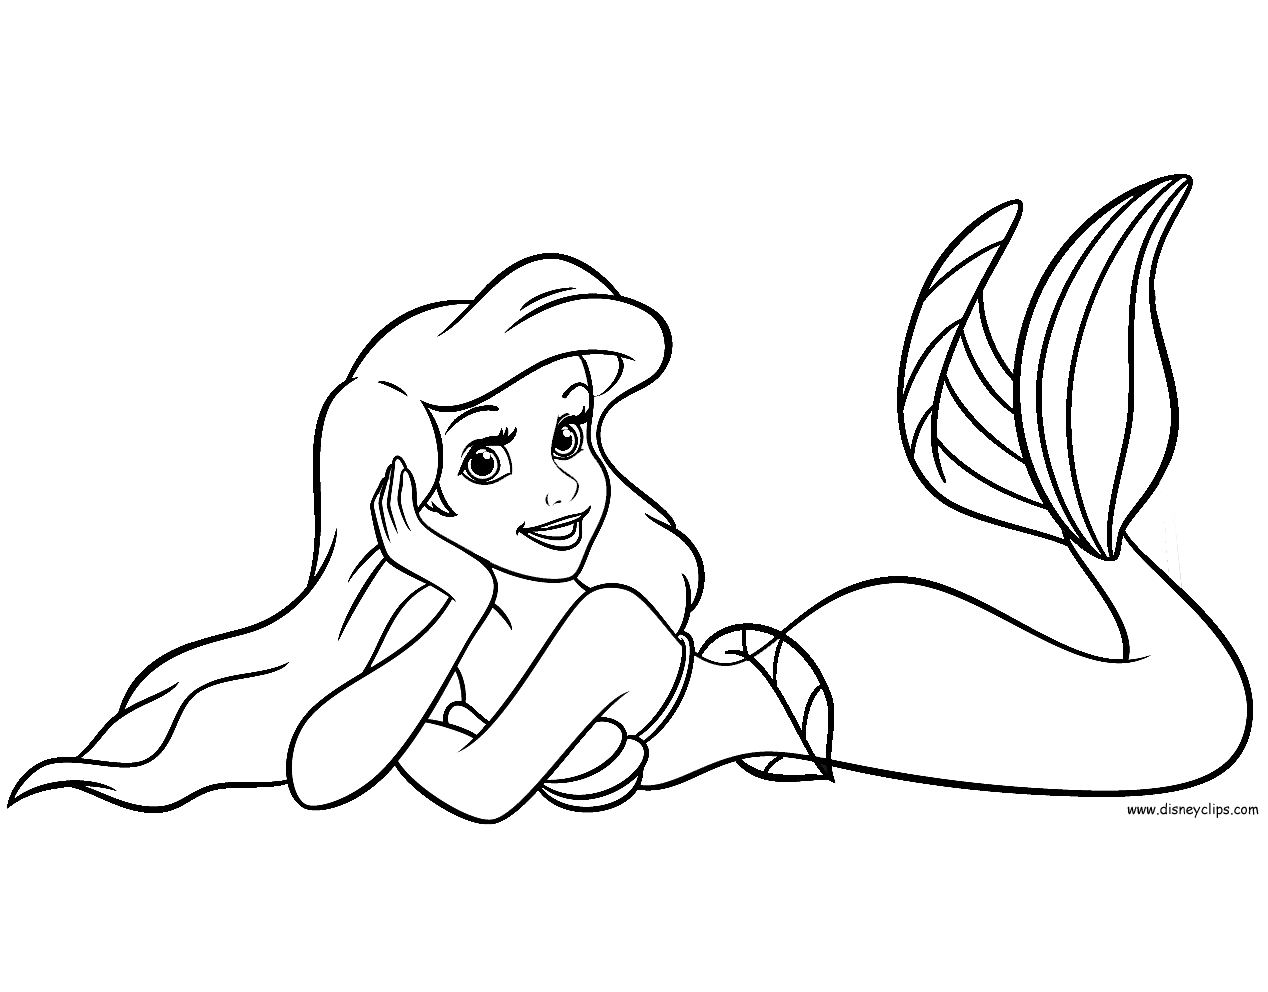 The Little Mermaid Printable Coloring Pages 3 Disney